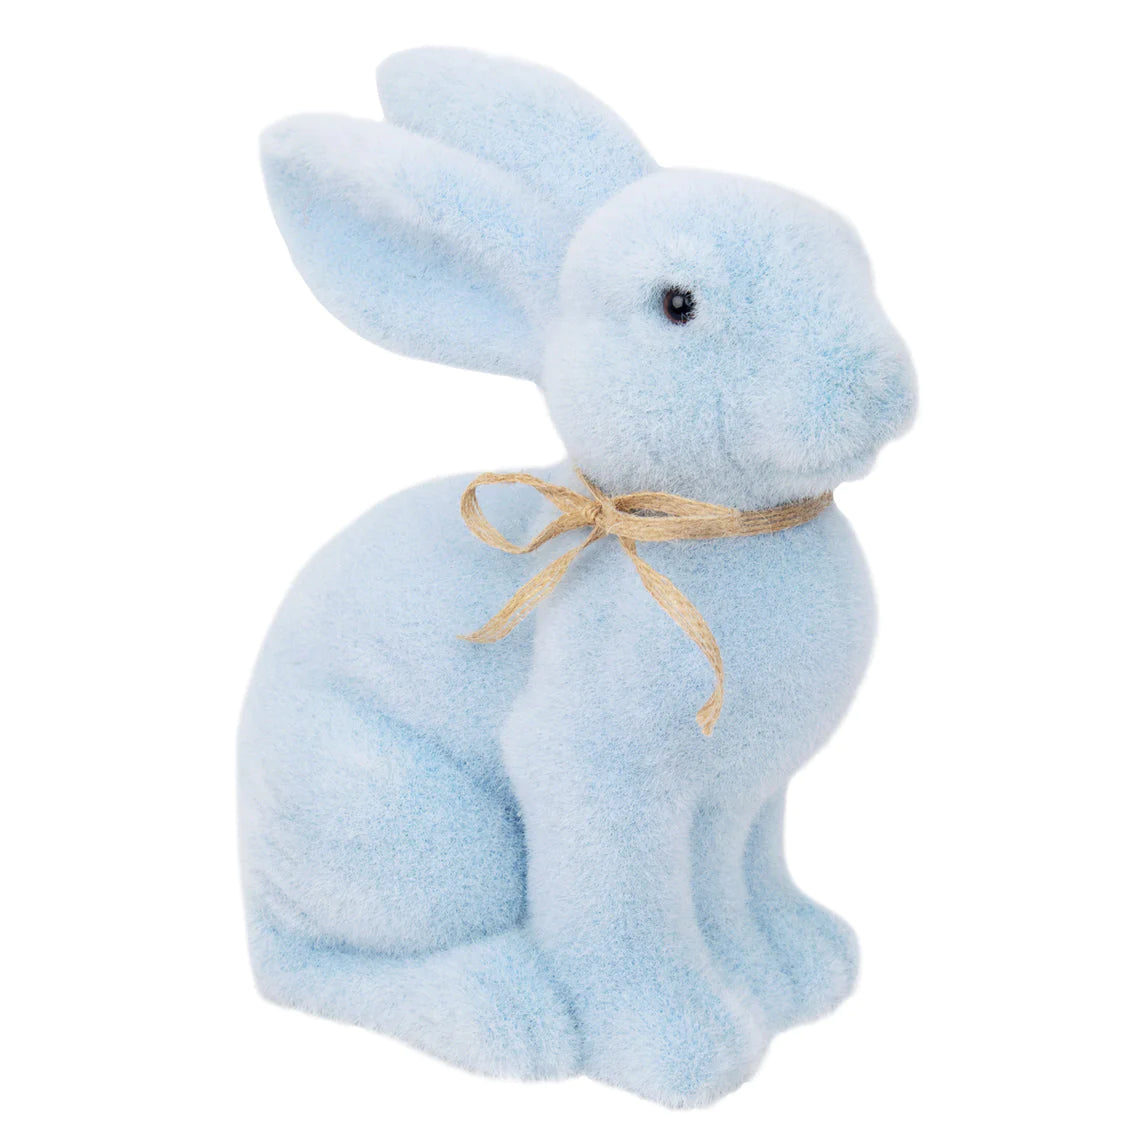 LARGE BLUE GRASS BUNNY